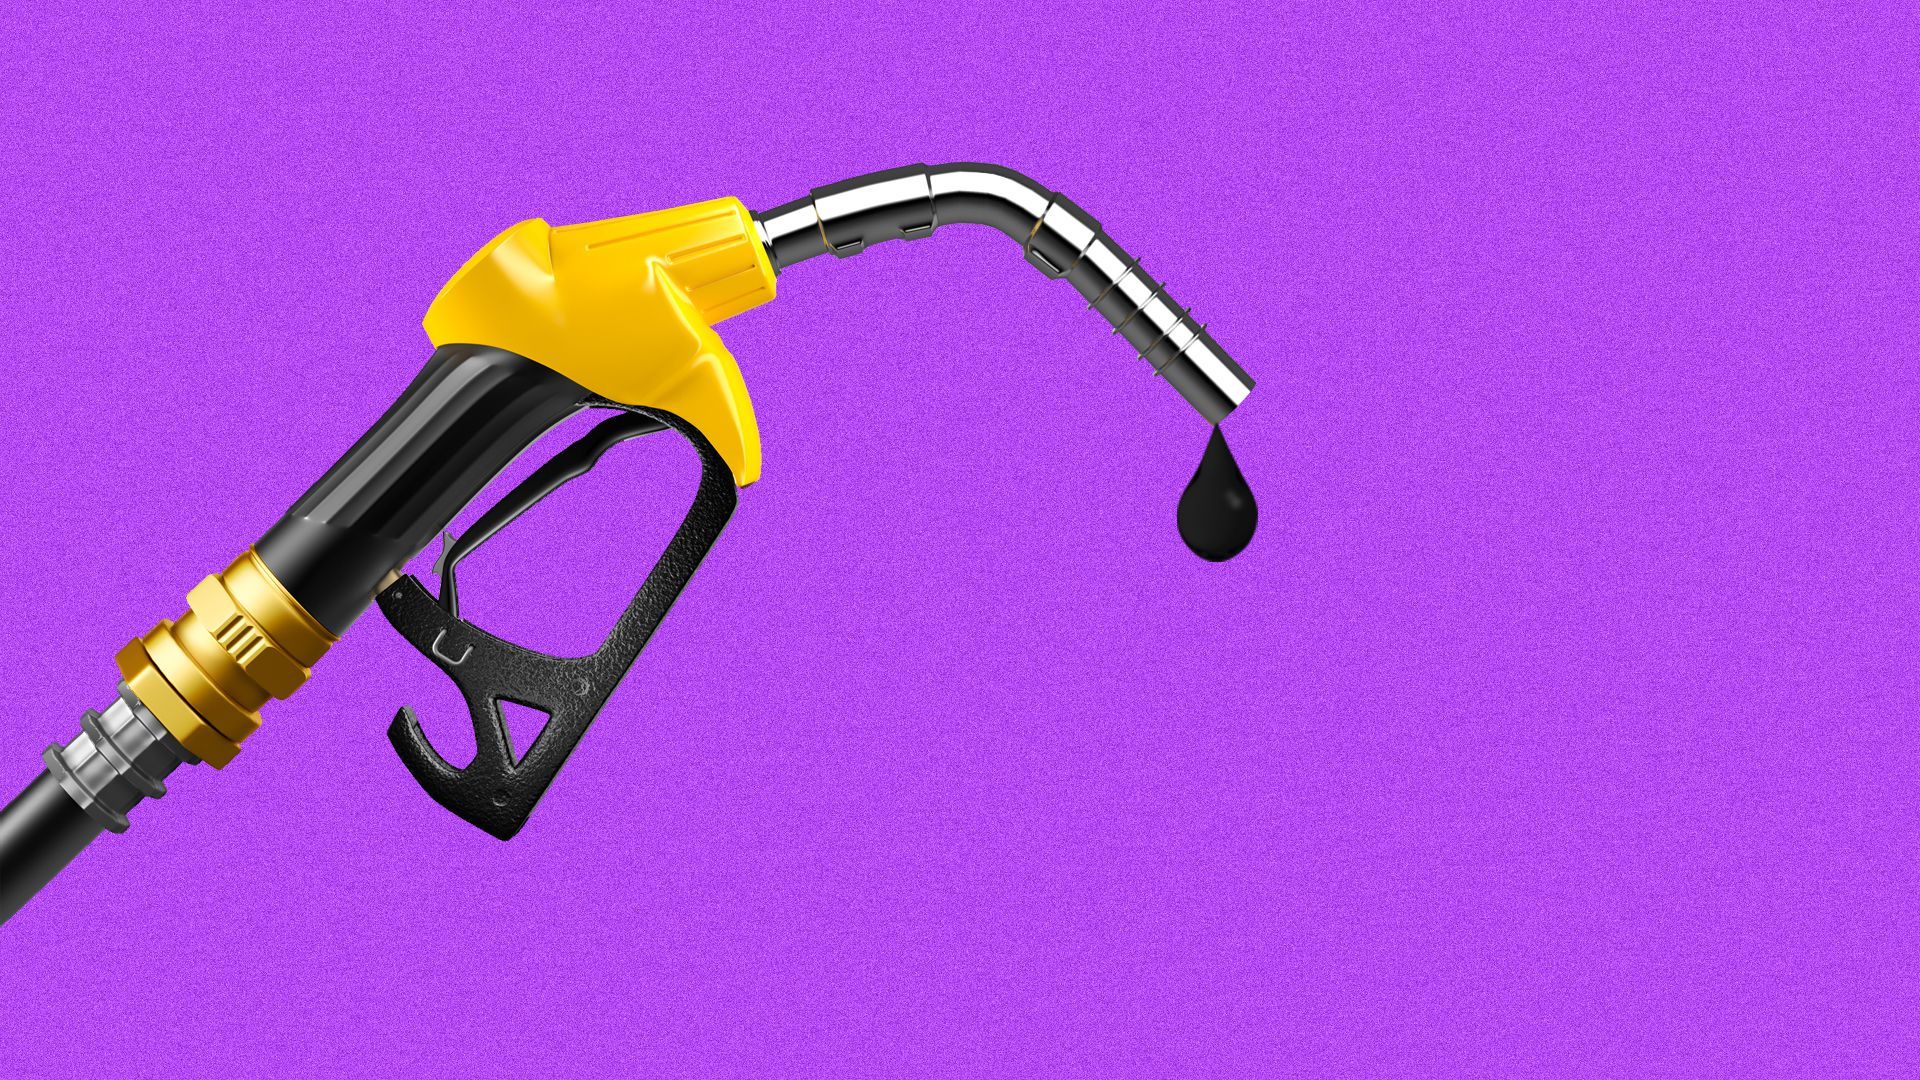 Gas nozzle dripping